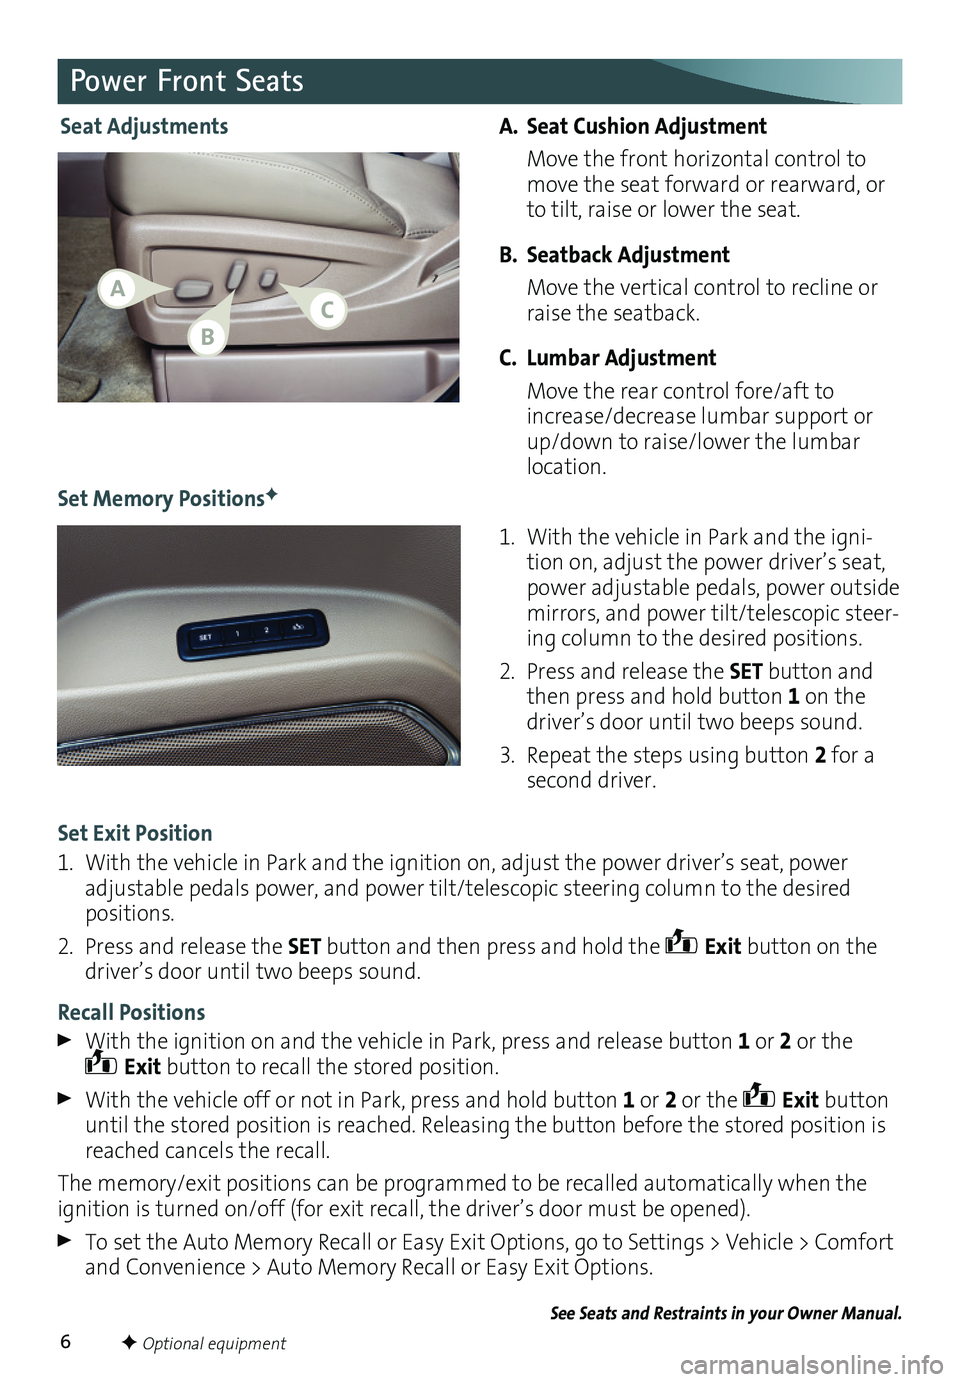 GMC YUKON 2016  Get To Know Guide 6
A. Seat Cushion Adjustment
 Move the front horizontal control to move the seat forward or rearward, or to tilt, raise or lower the seat.
B. Seatback Adjustment
 Move the vertical control to recline 